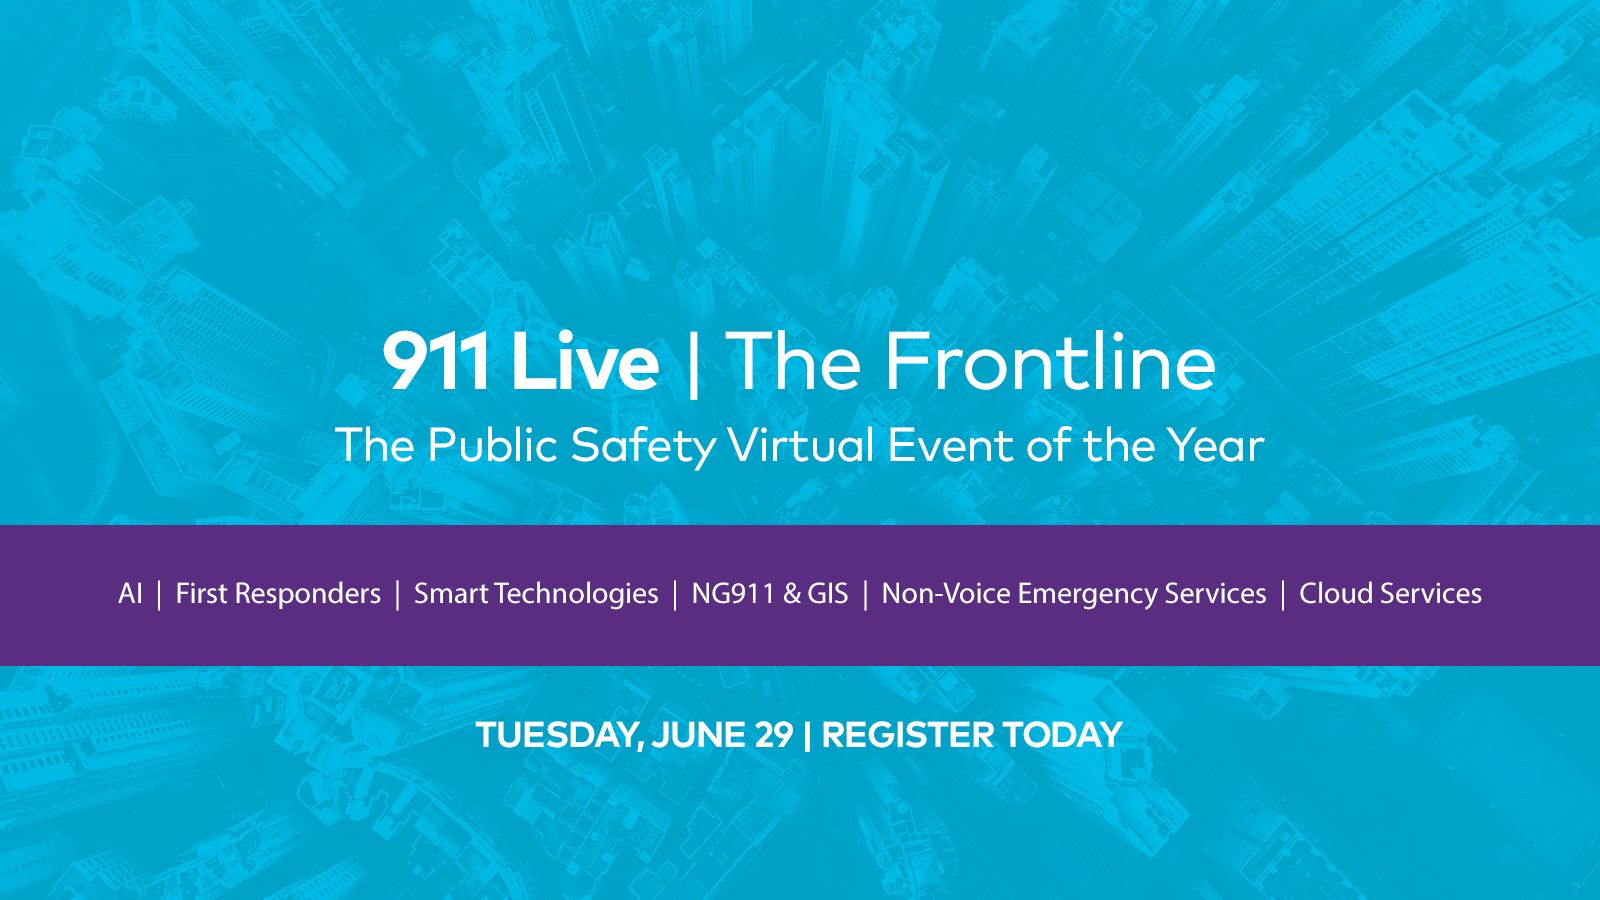 911 Live | The Frontline: 911 Live | The Frontline